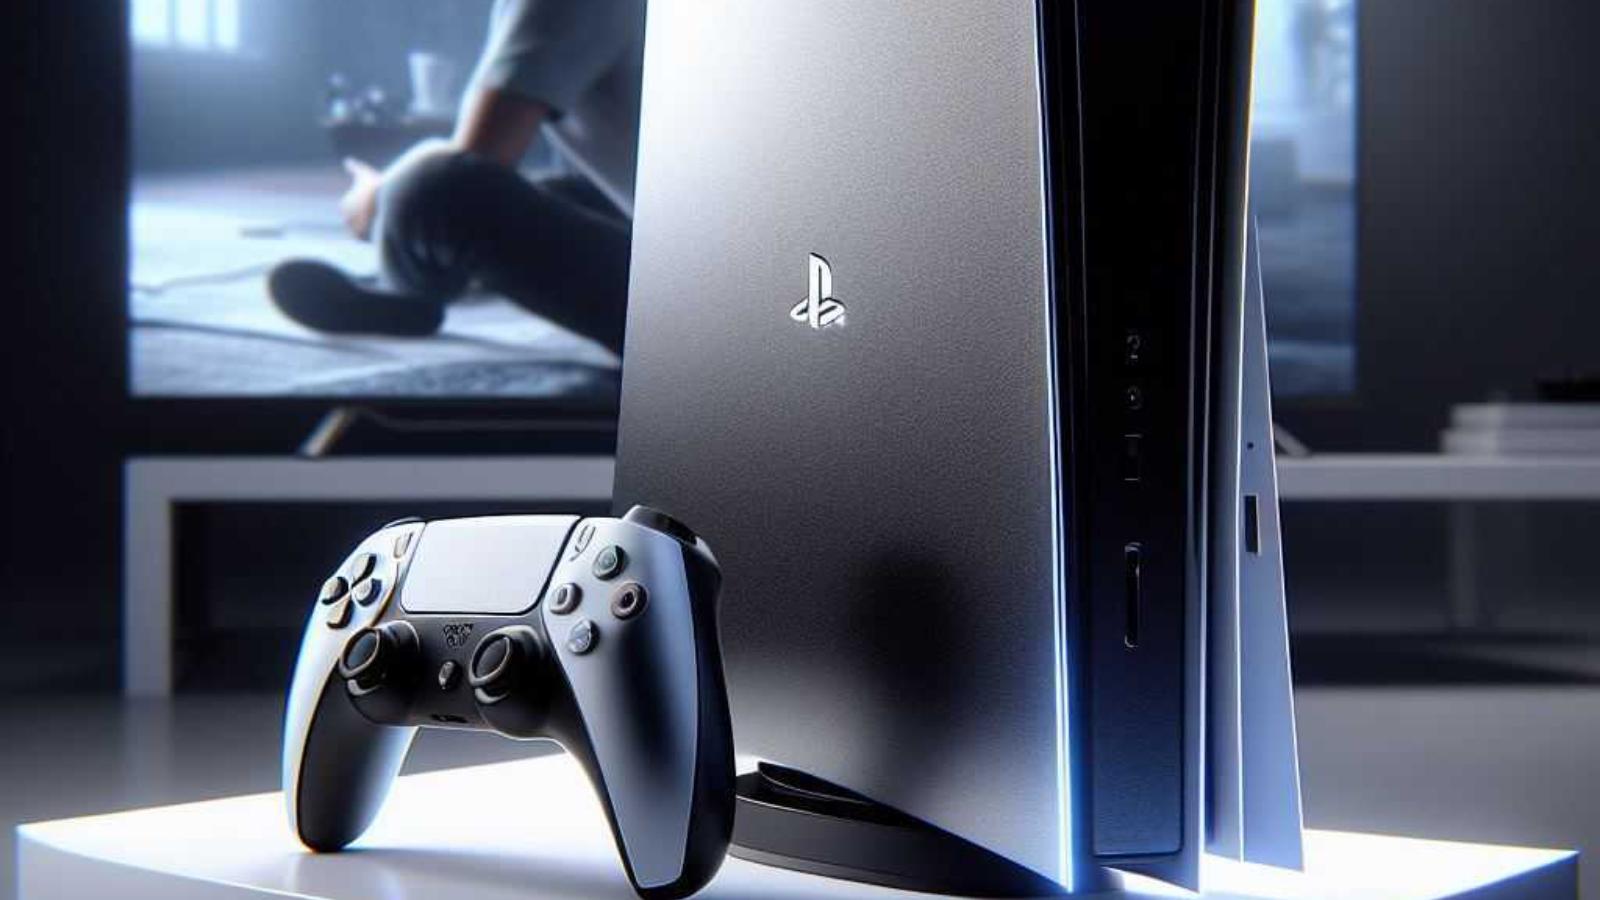 When will PS5 Pro come out? The date is the only thing we already